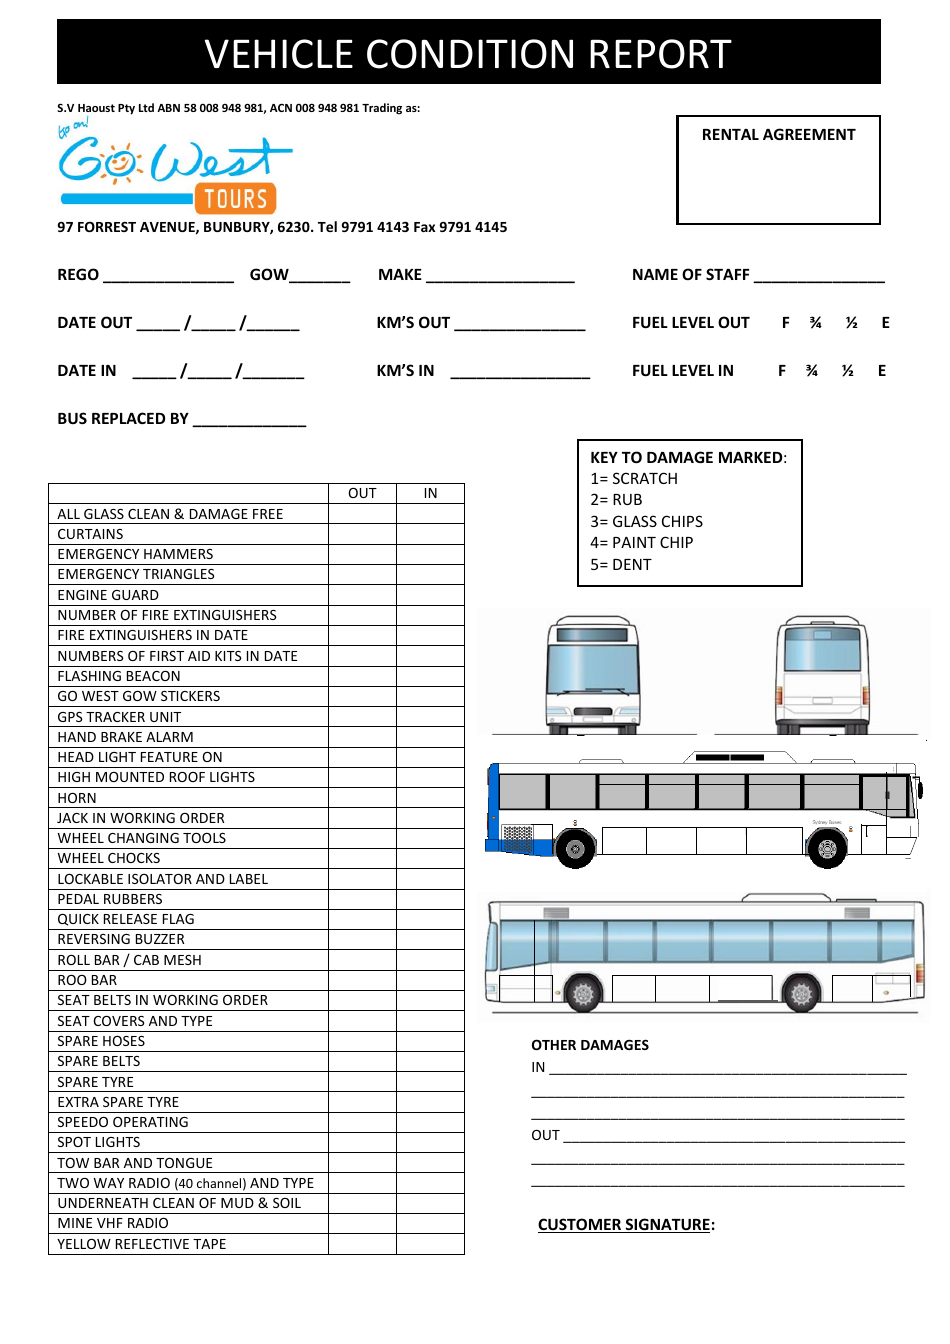 Vehicle Condition Report Template - Cowest Tours, Page 1